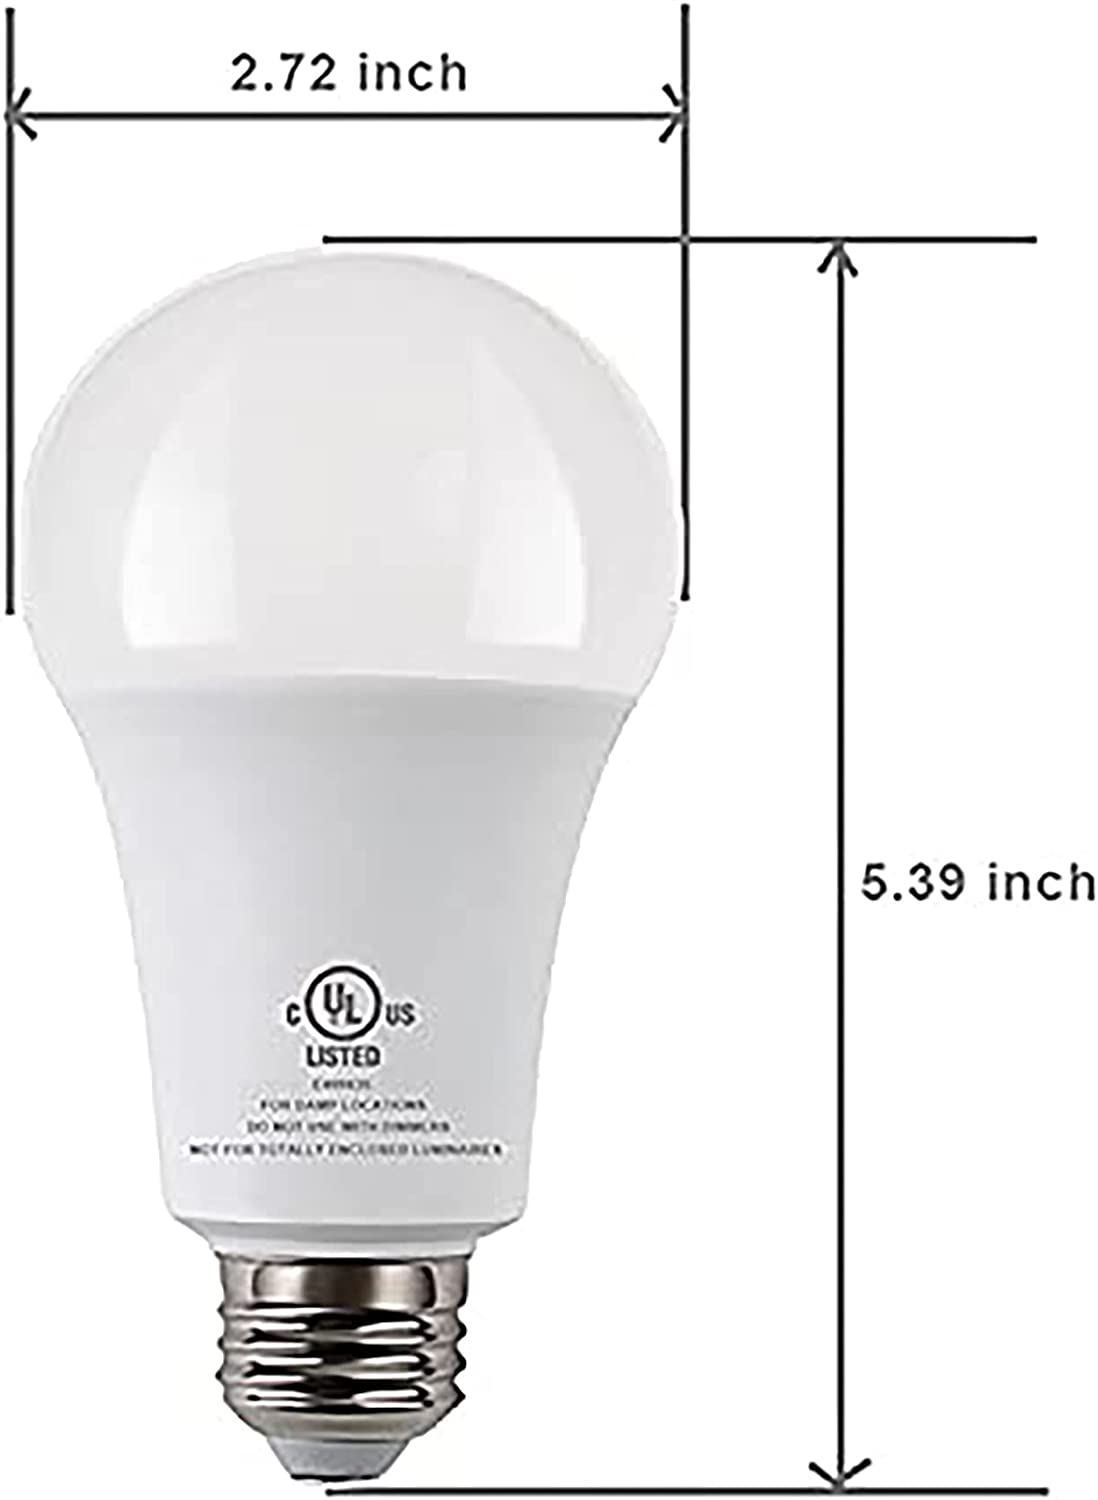 Safelumin LED Safety Light for Power Outages (Cool White - 5000K